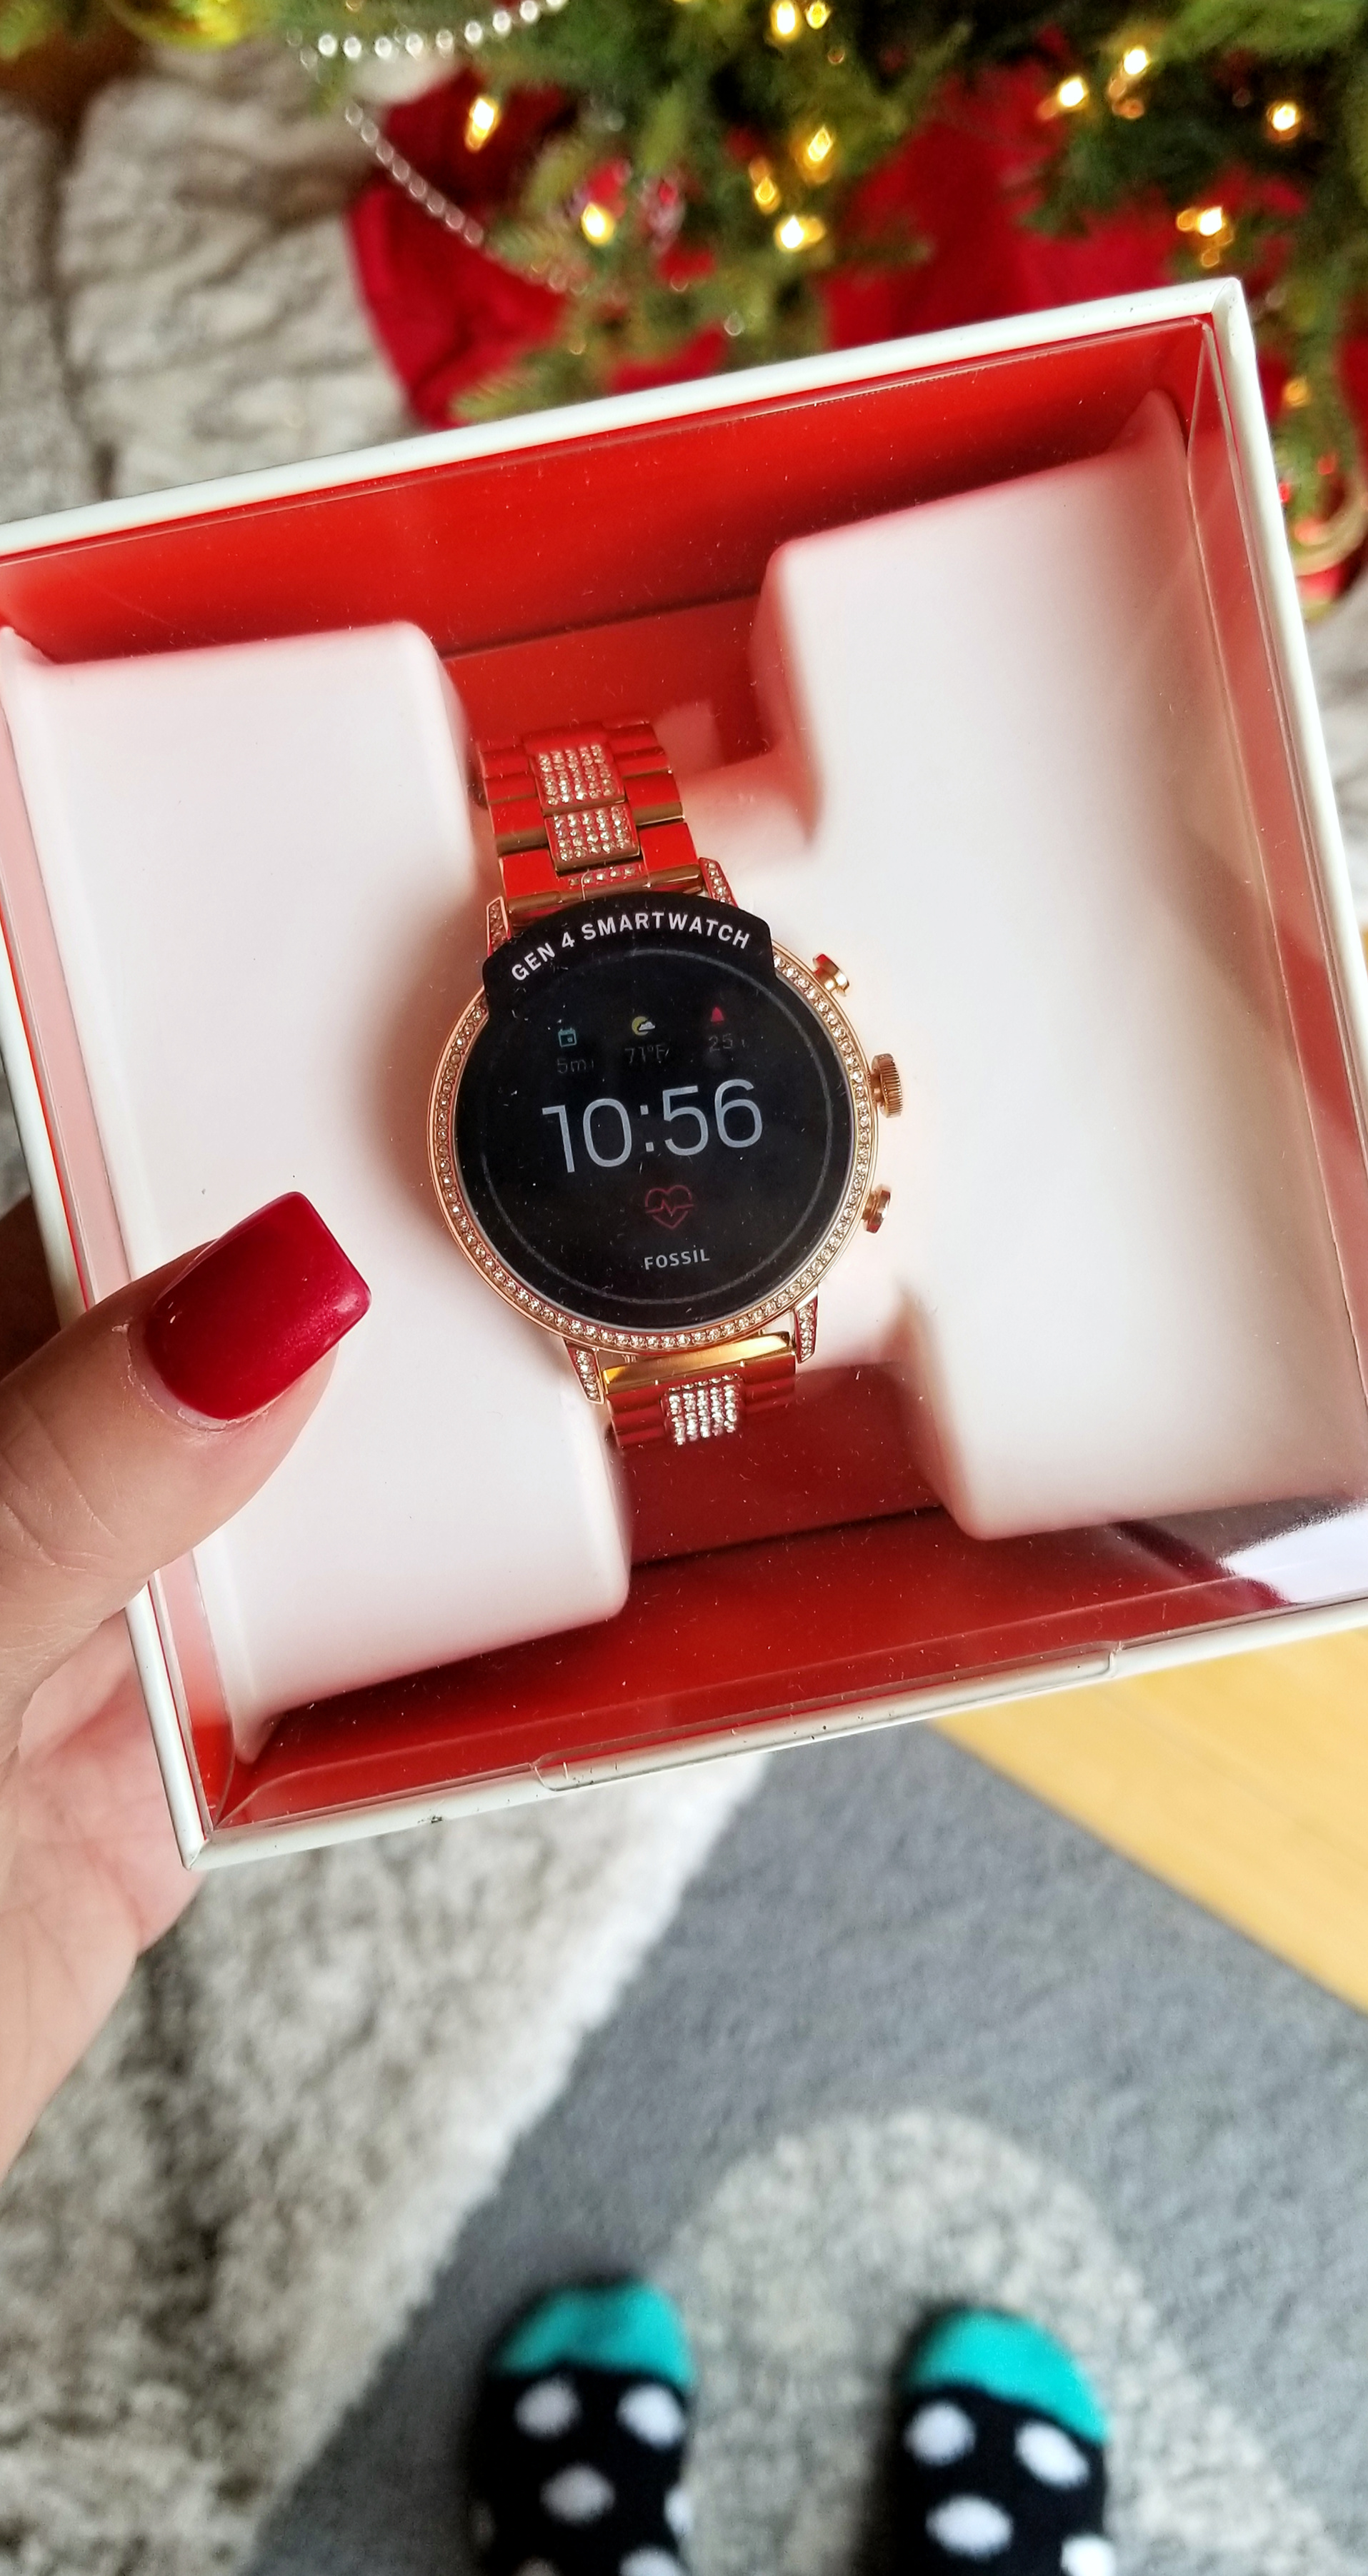 Get tips to make every minute count with a Fossil Women's Smart Watch + Wear OS by Google. The Fossil Gen 4 Venture HR Smartwatch, available at Best Buy, provides many helpful healthy lifestyle and productivity features. Plus, you don't have to sacrifice style with this Fossil smart watch in fashionable rose gold.